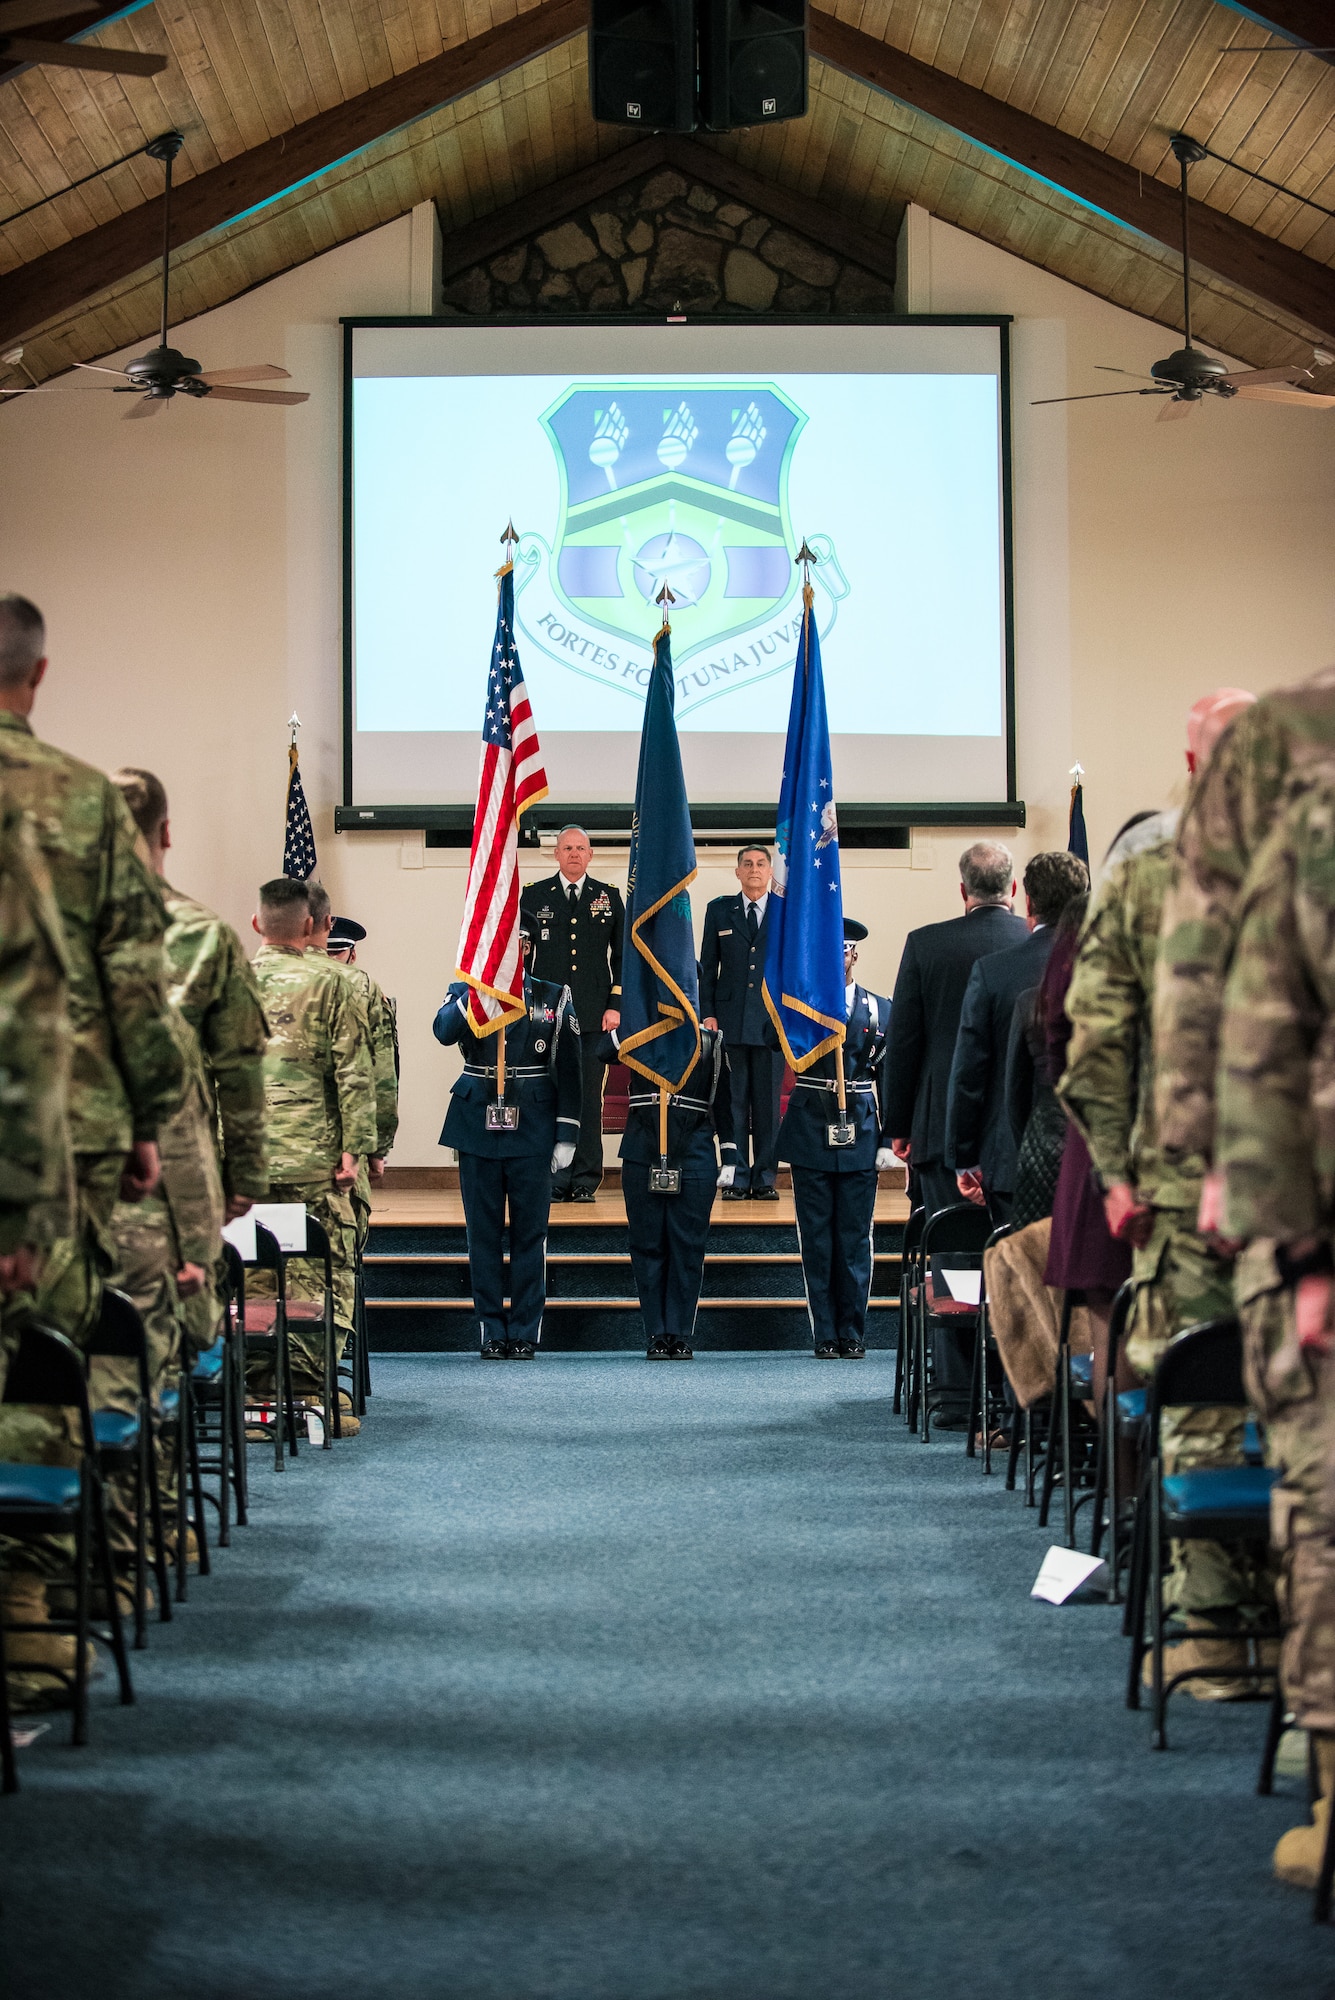 The 123rd Airlift Wing Honor Guard presents the colors at the Kentucky Air National Guard Base on Louisville, Ky., Nov. 16, 2019, during a retirement ceremony for Brig. Gen. Warren Hurst. Hurst most recently served as assistant adjutant general for Air in the Kentucky National Guard. (U.S. Air National Guard photo by Lt. Col. Dale Greer)